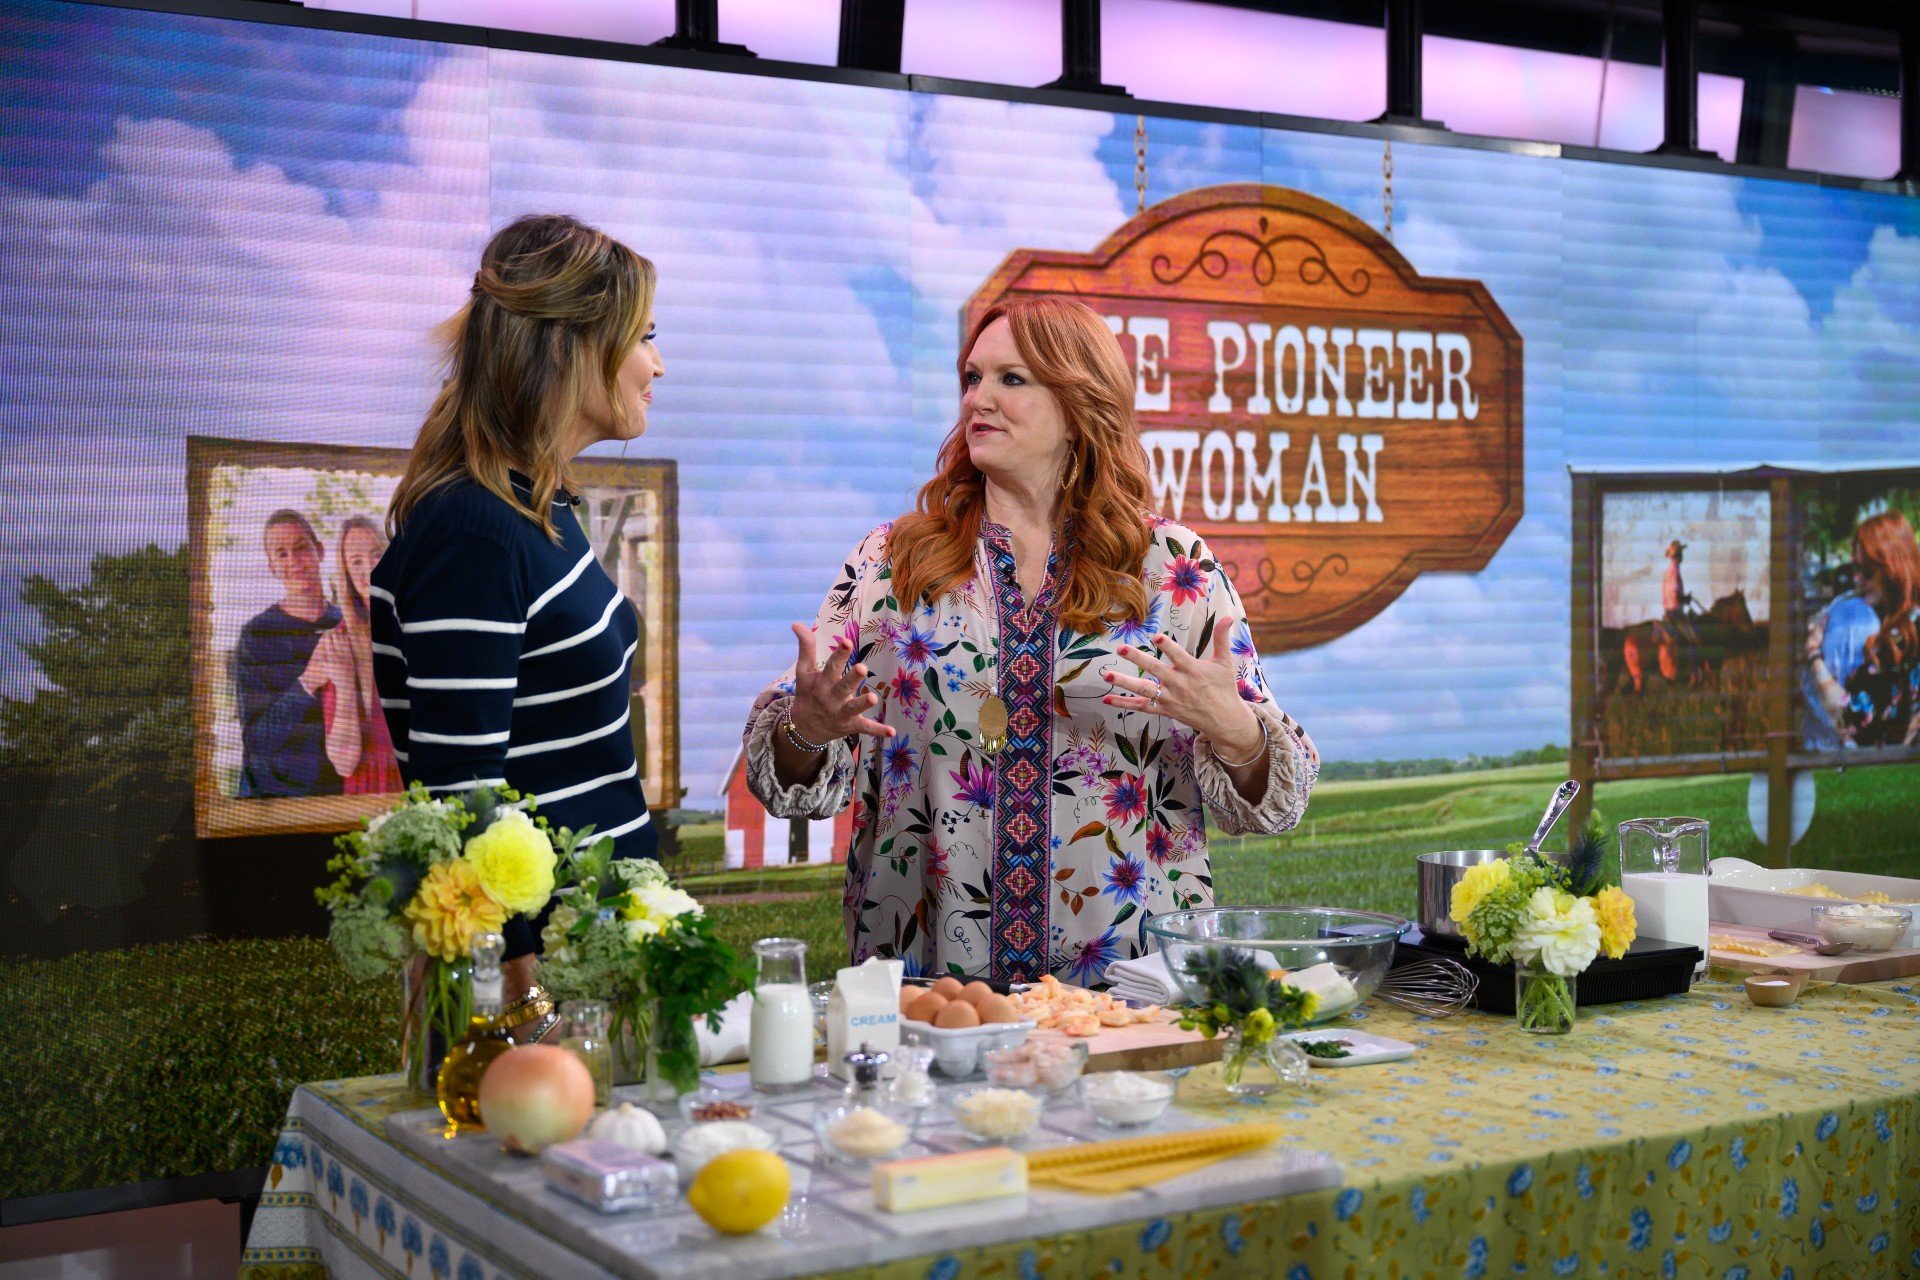 Savannah Guthrie talks to The Pioneer Woman Ree Drummond during a cooking demonstration on the Today show.